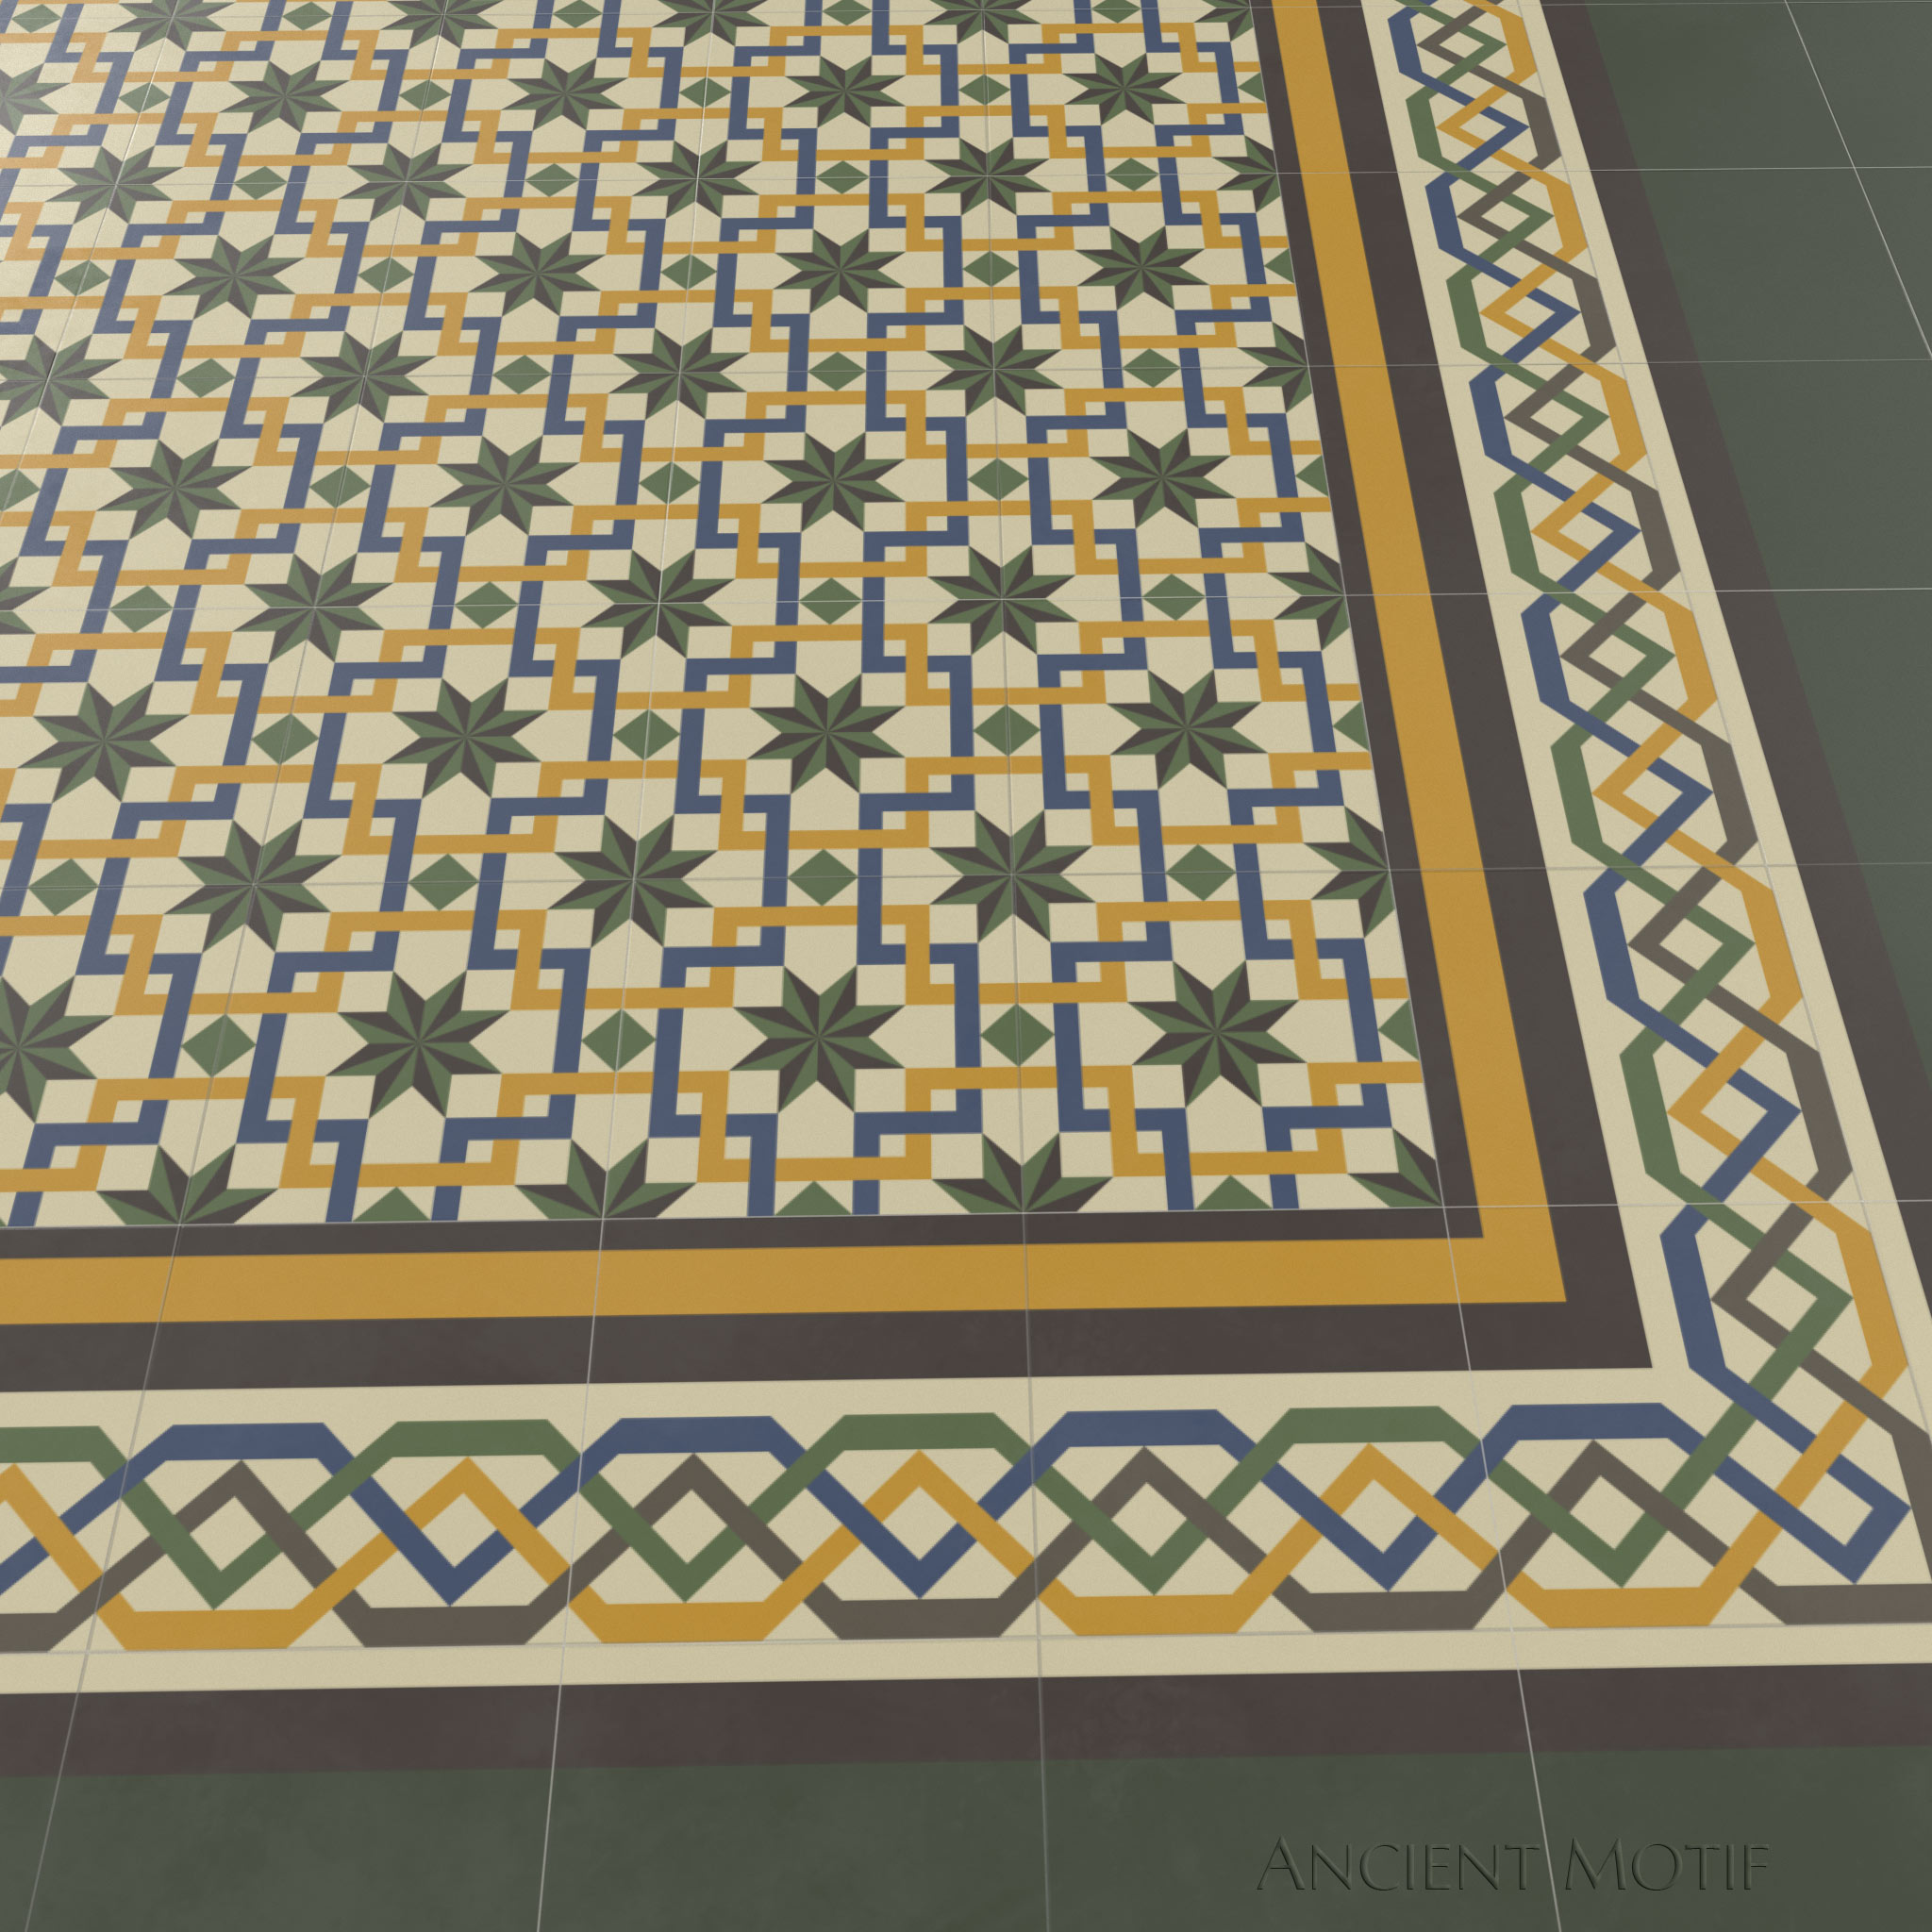 Andalusia Encaustic Cement Tile Floor in Moss, Goldenrod and Chocolate